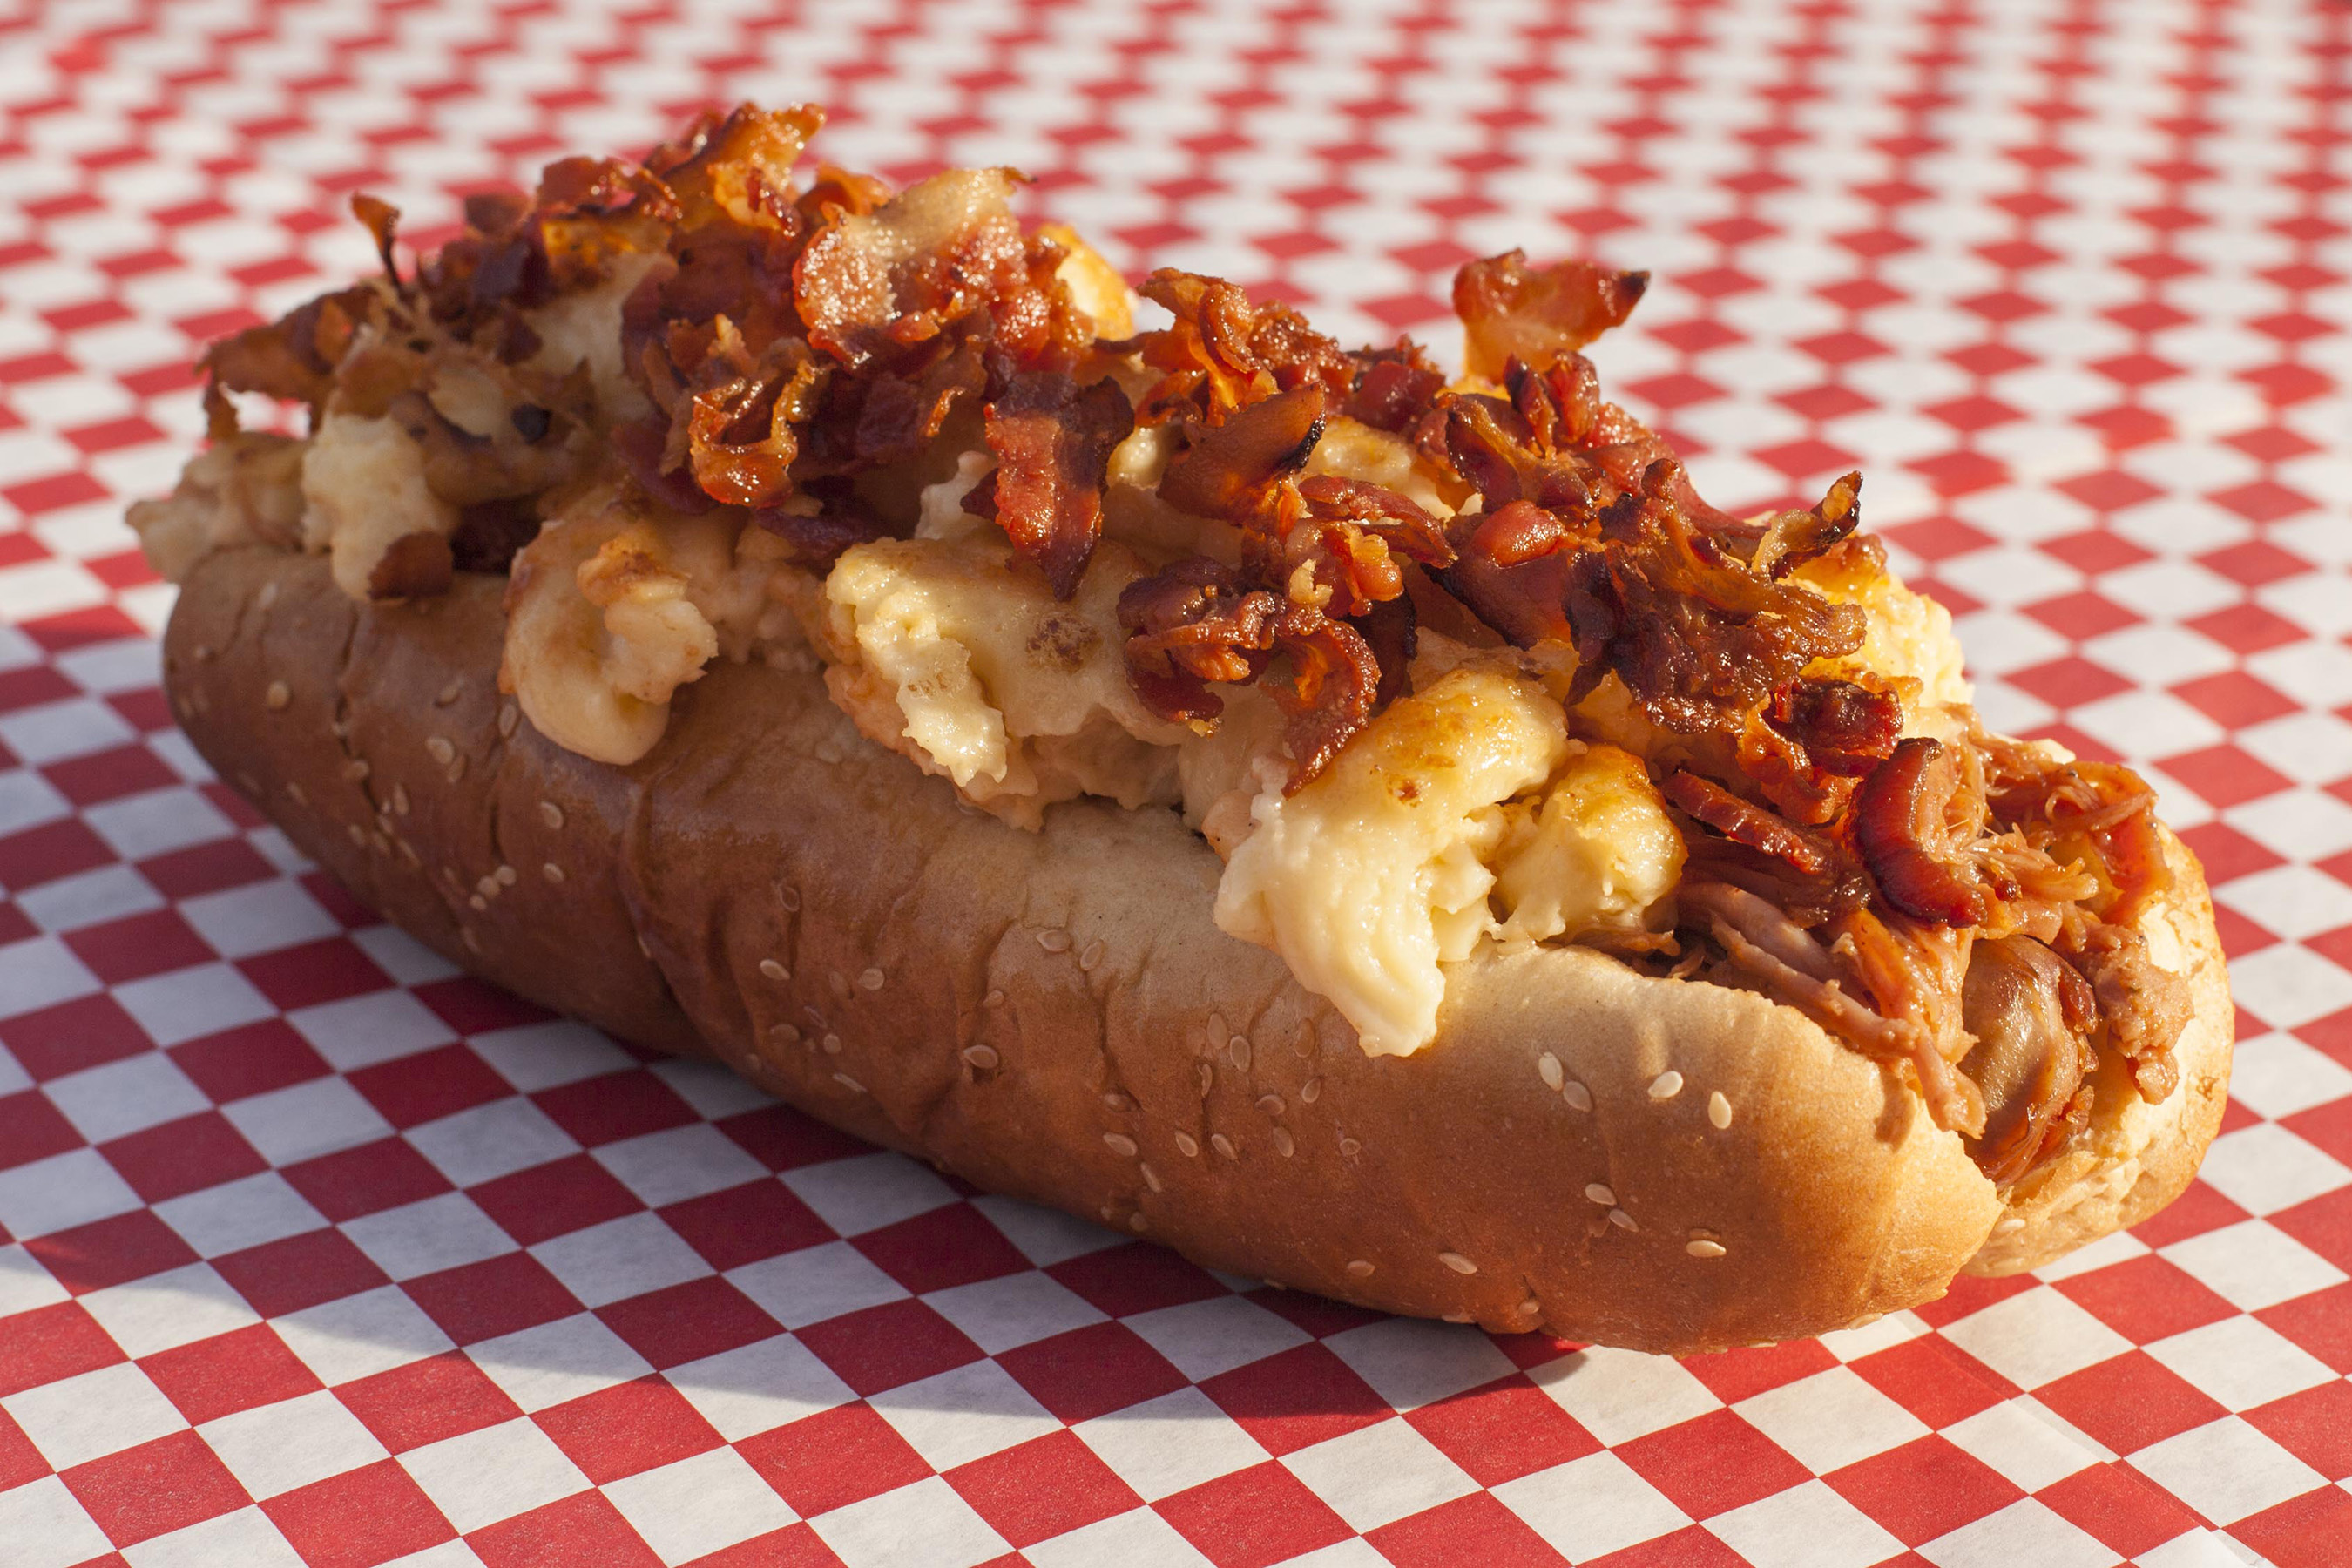 The Granddaddy Dog features a quarter-pound hot dog topped with mac-n-cheese, pulled pork, bacon and barbecue sauce.